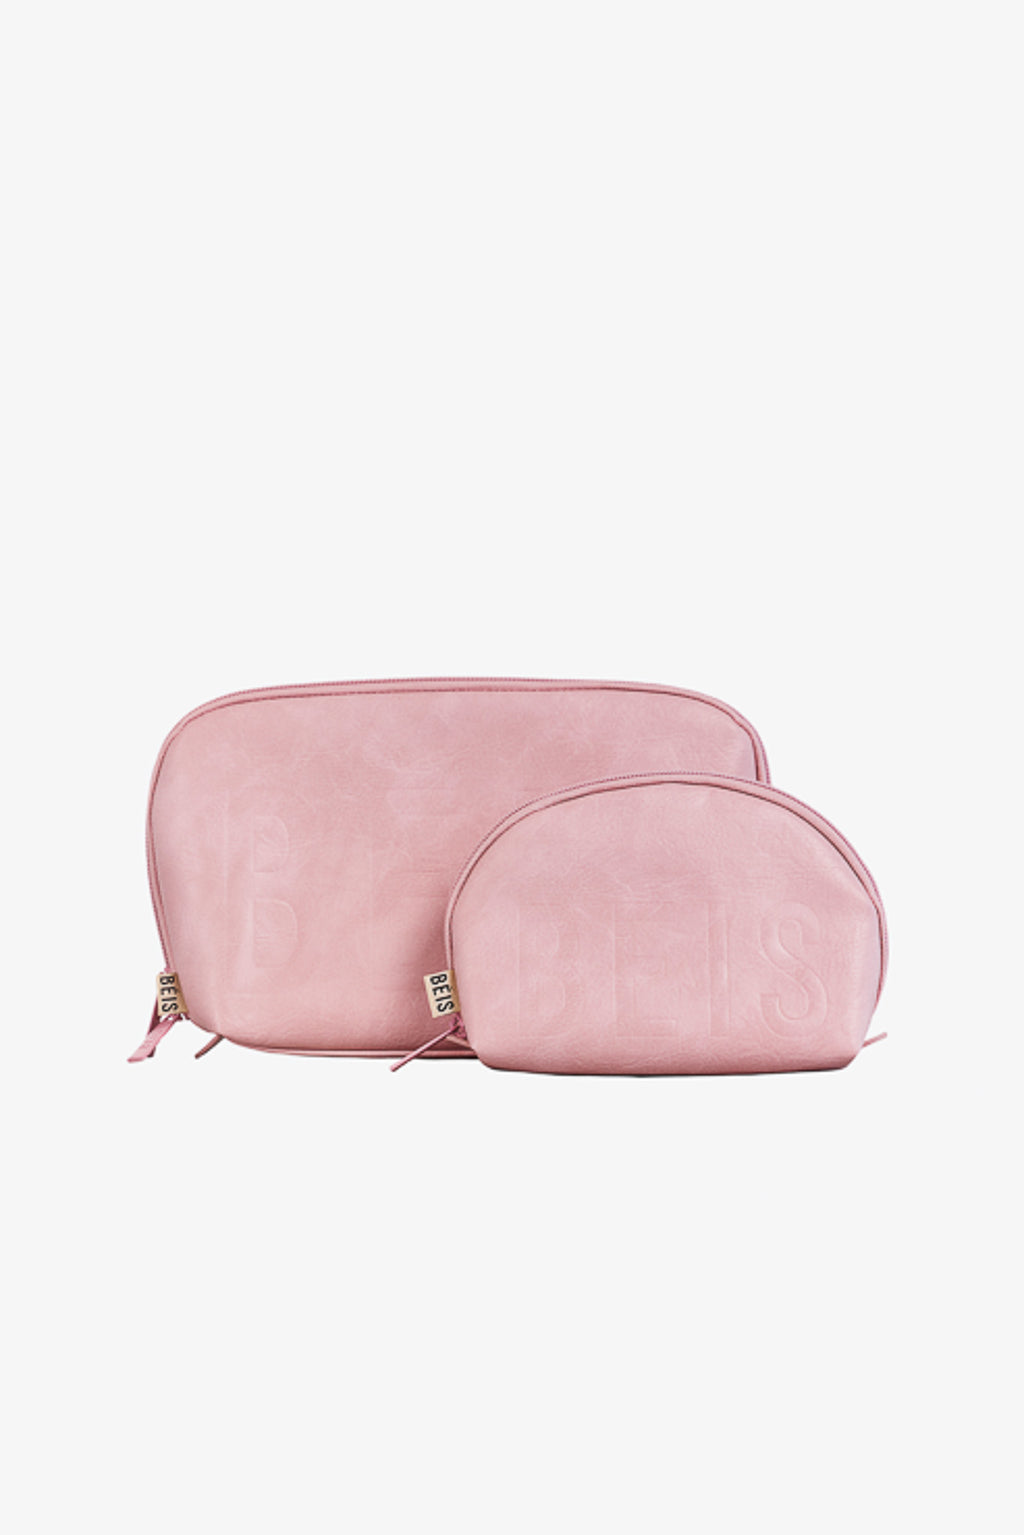 BÉIS 'The Cosmetic Pouch Set' in Pink - Cosmetic Travel Bag Set